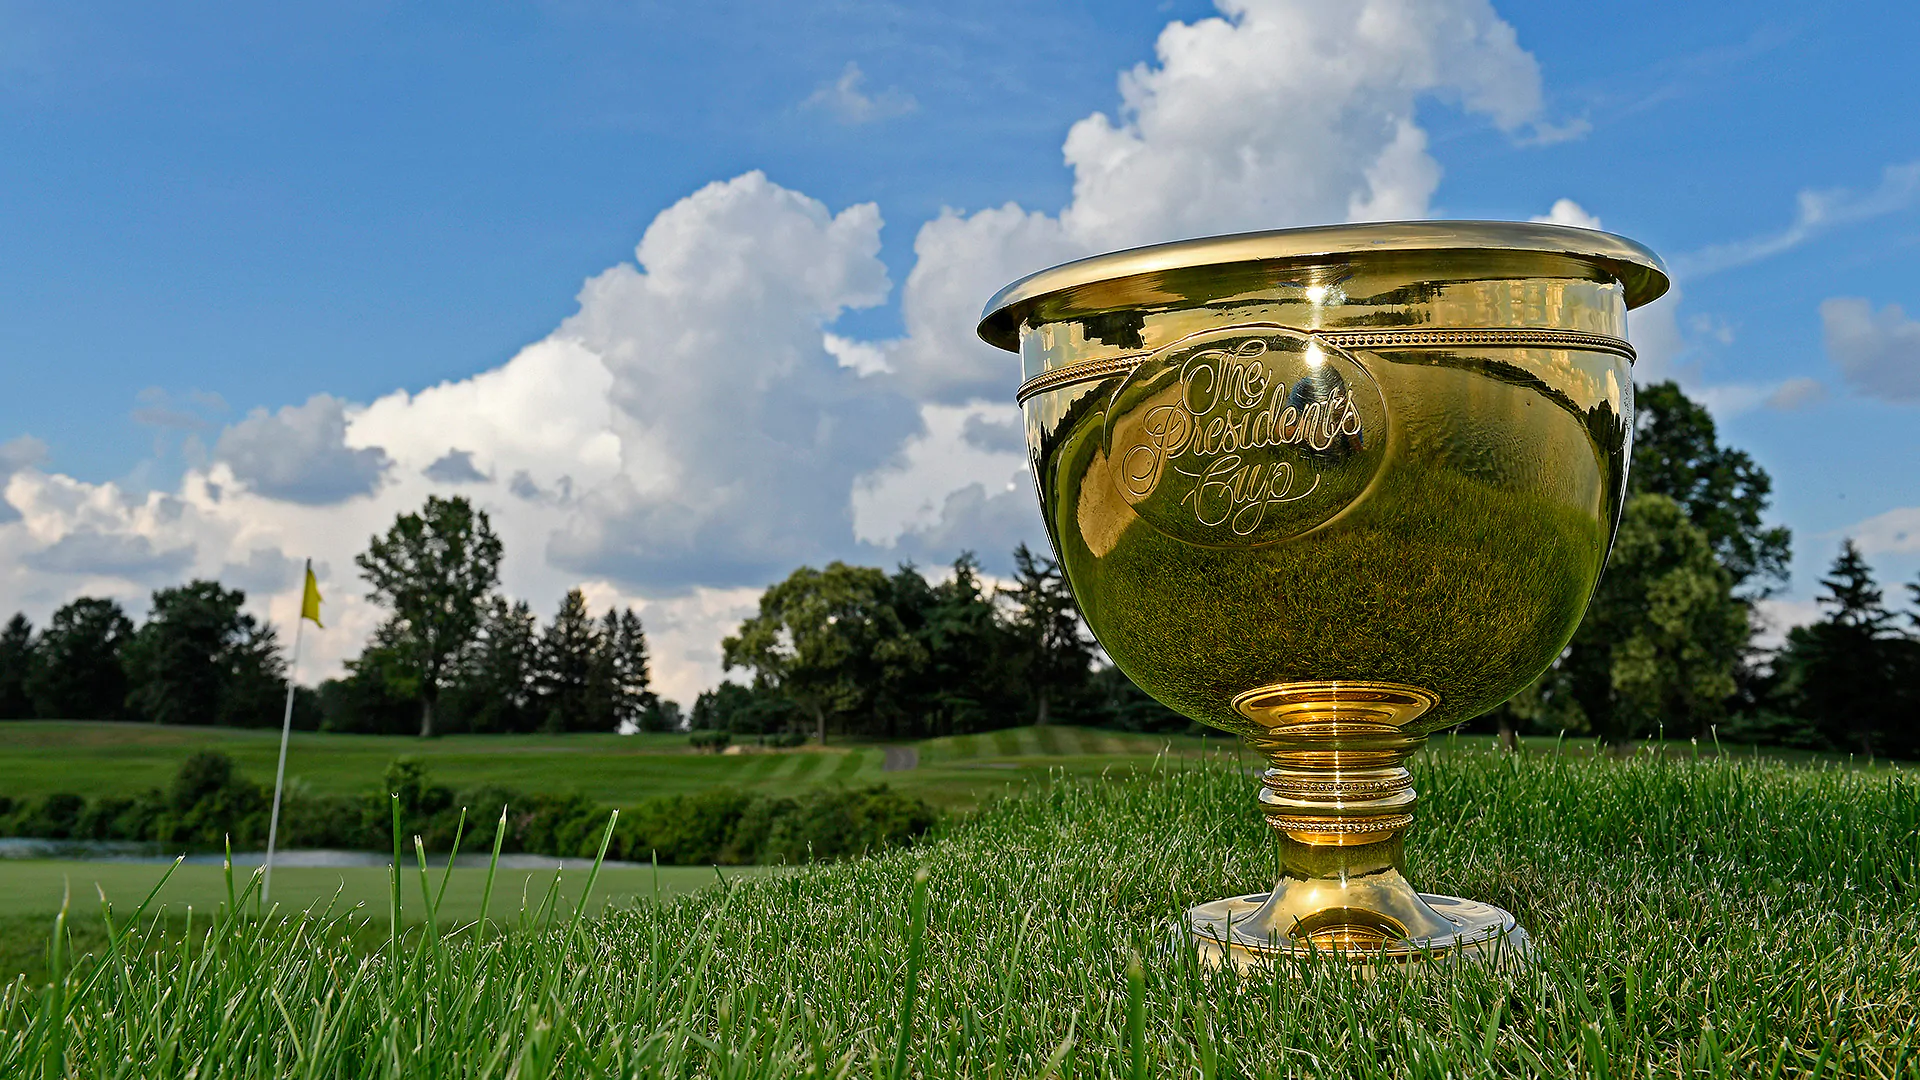 Presidents Cup 101: A guide to this week's matches